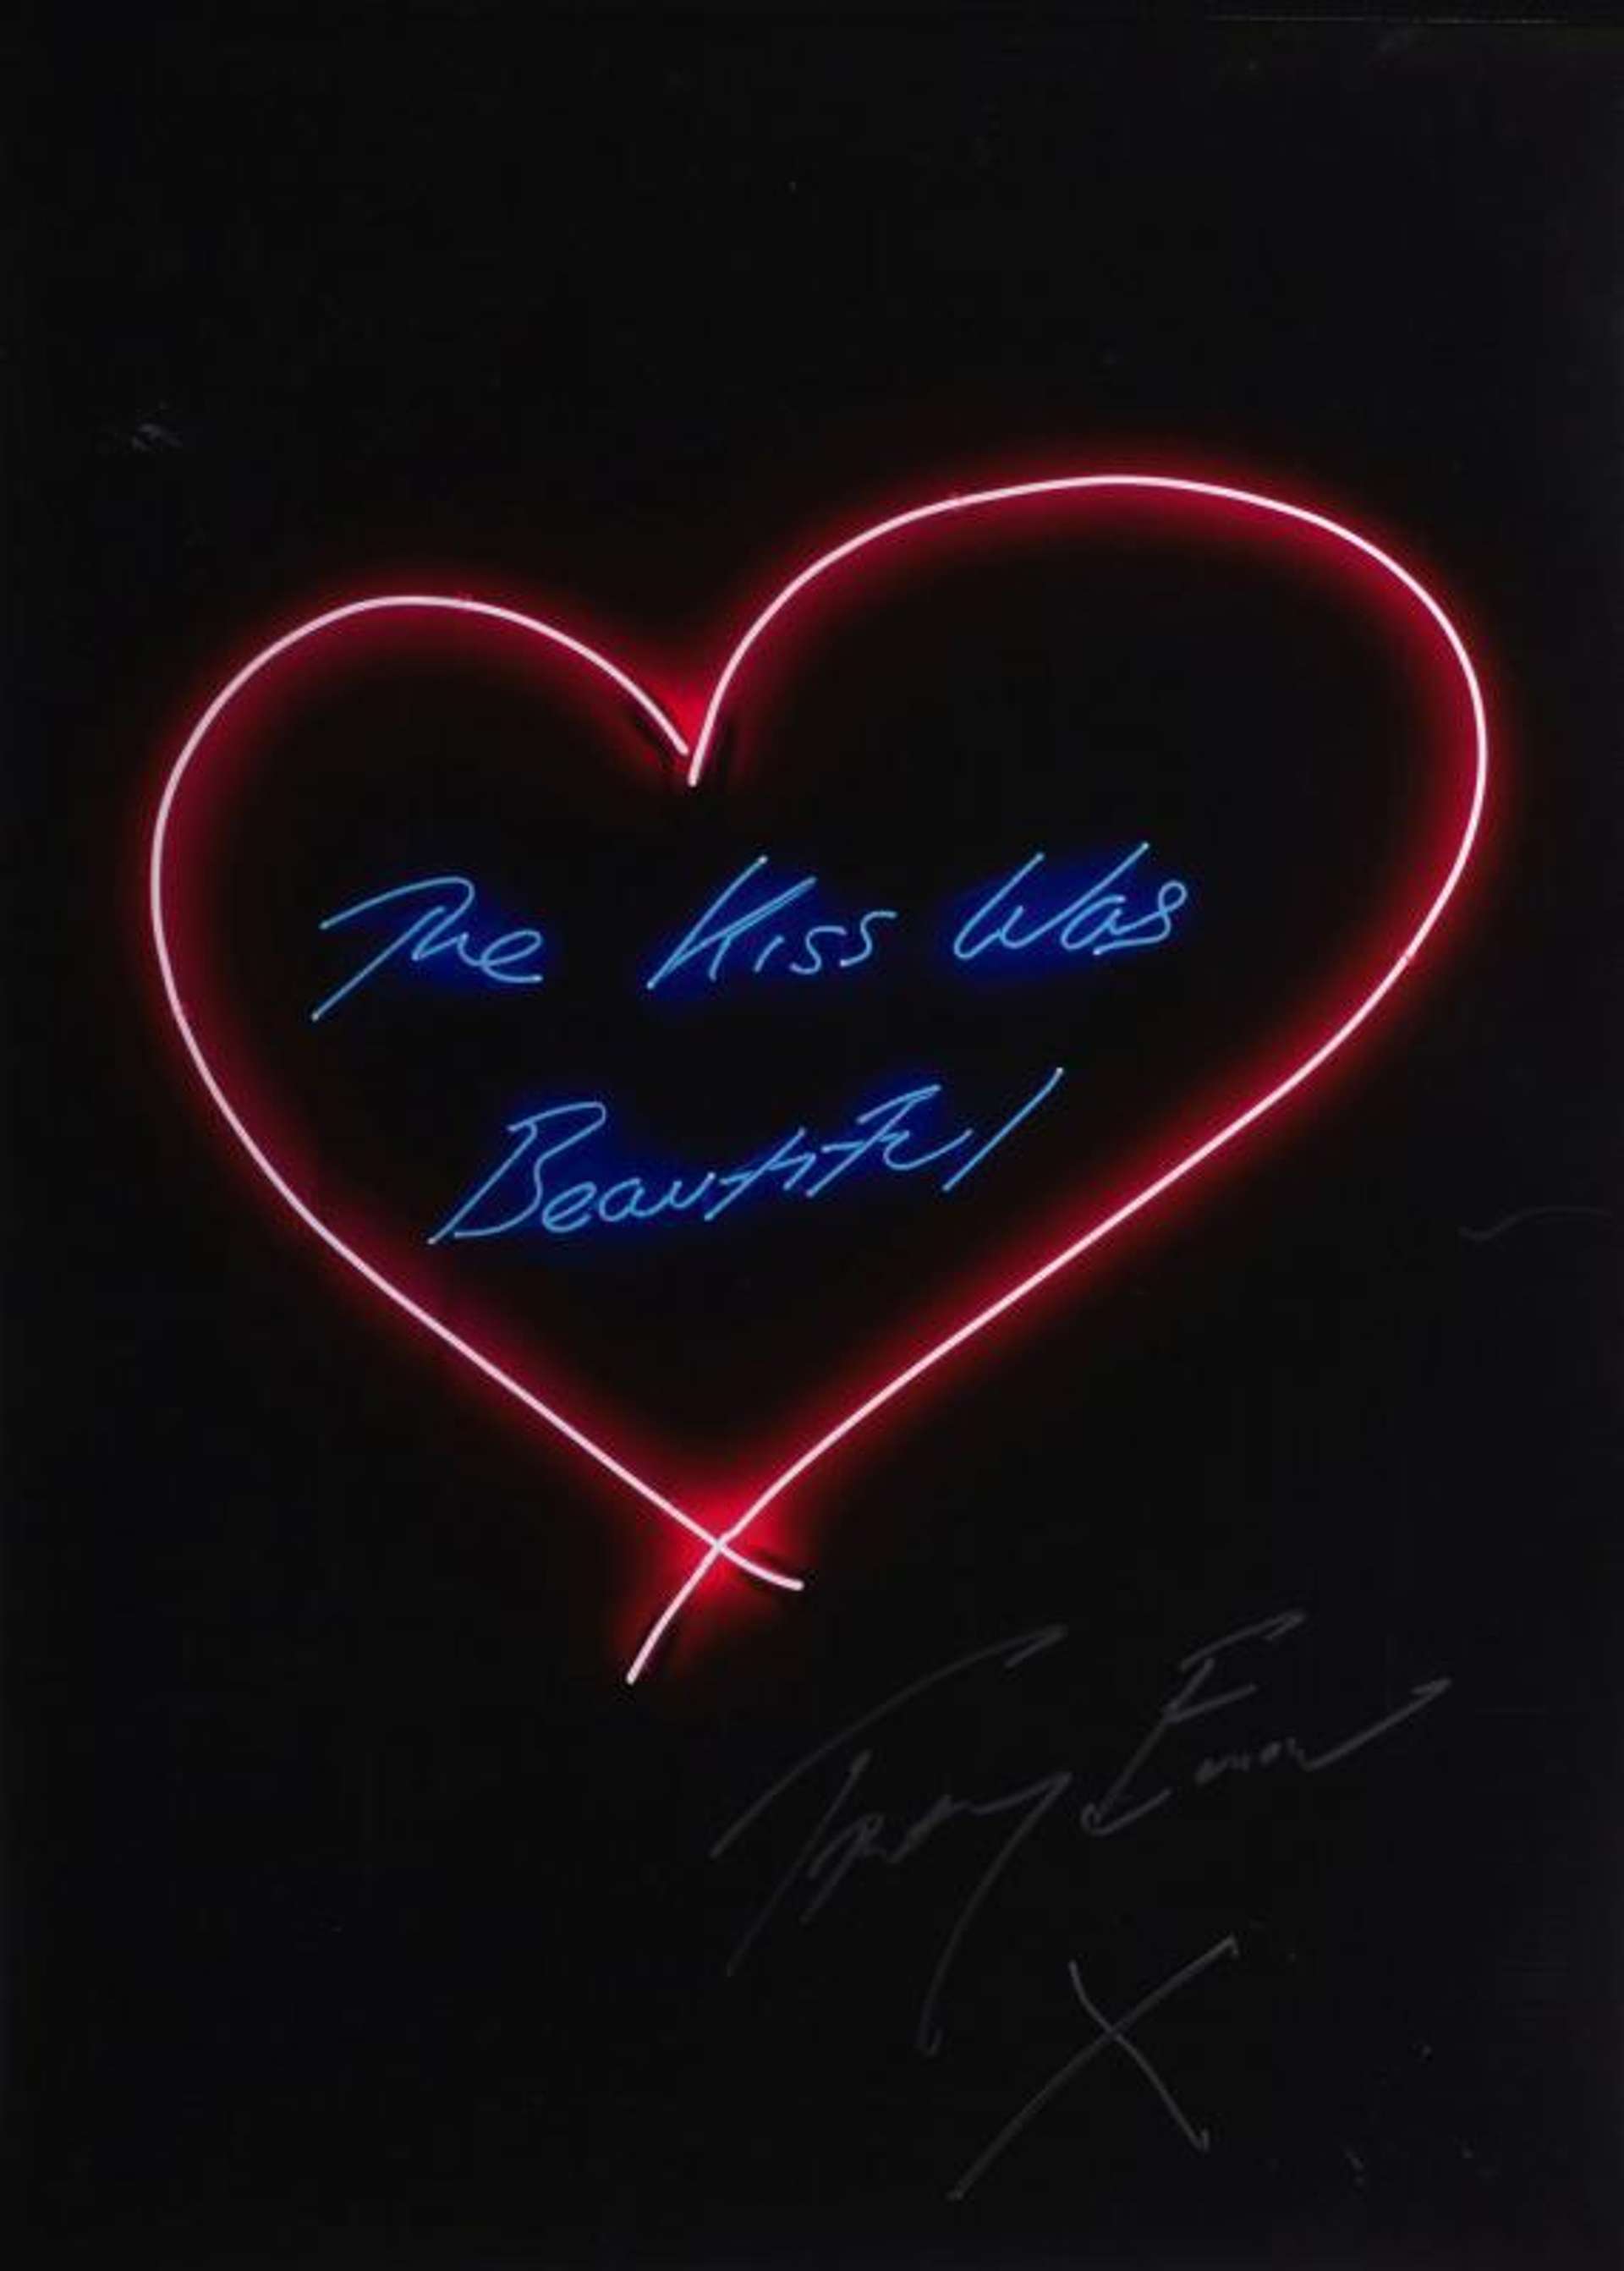 This print captures one of Tracey Emin’s works from her Neons collection. The text, from which the work takes its title, is executed in Emin’s distinctive handwriting with blue neon lights. Framed by an illuminated red love heart, the work is typical of Emin’s exploration of intimacy and relationships. Set against a black background to best show the glow of the neon lights, Emin’s signature and a kiss appear faintly in white beneath the neon work.